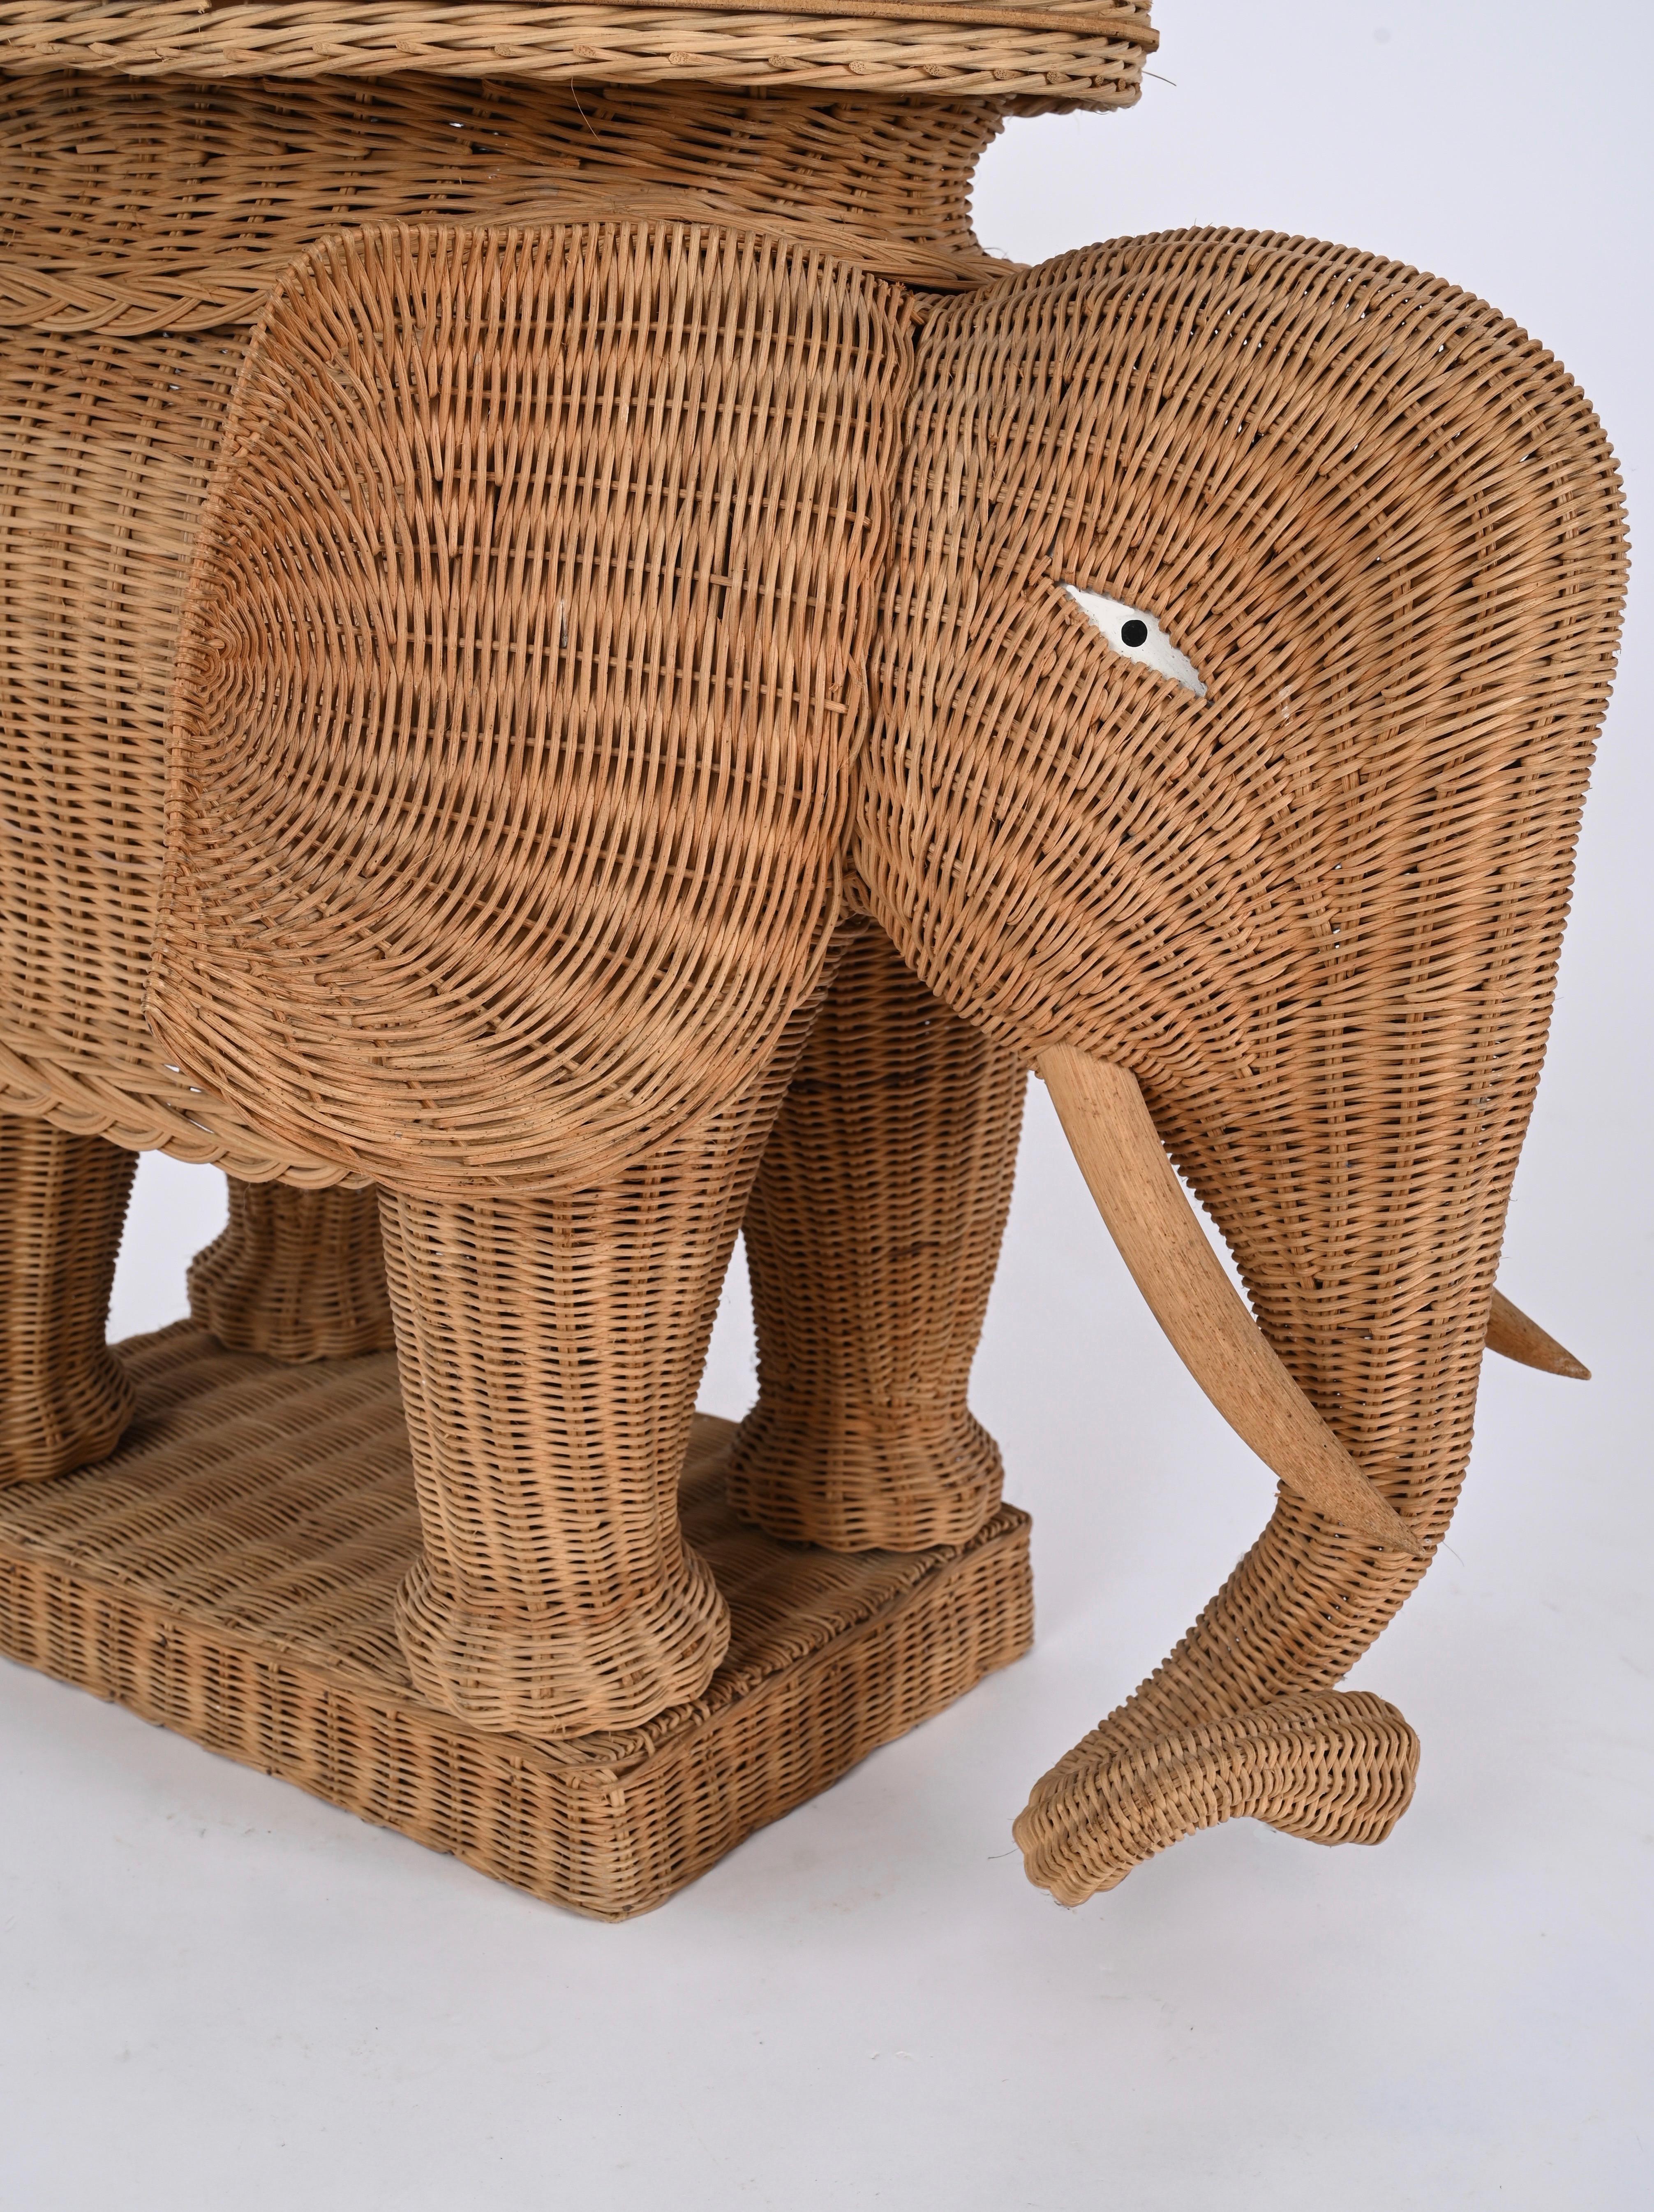 Large Rattan and Wicker Elephant Side Table by Vivai del Sud, Italy 1970s 2